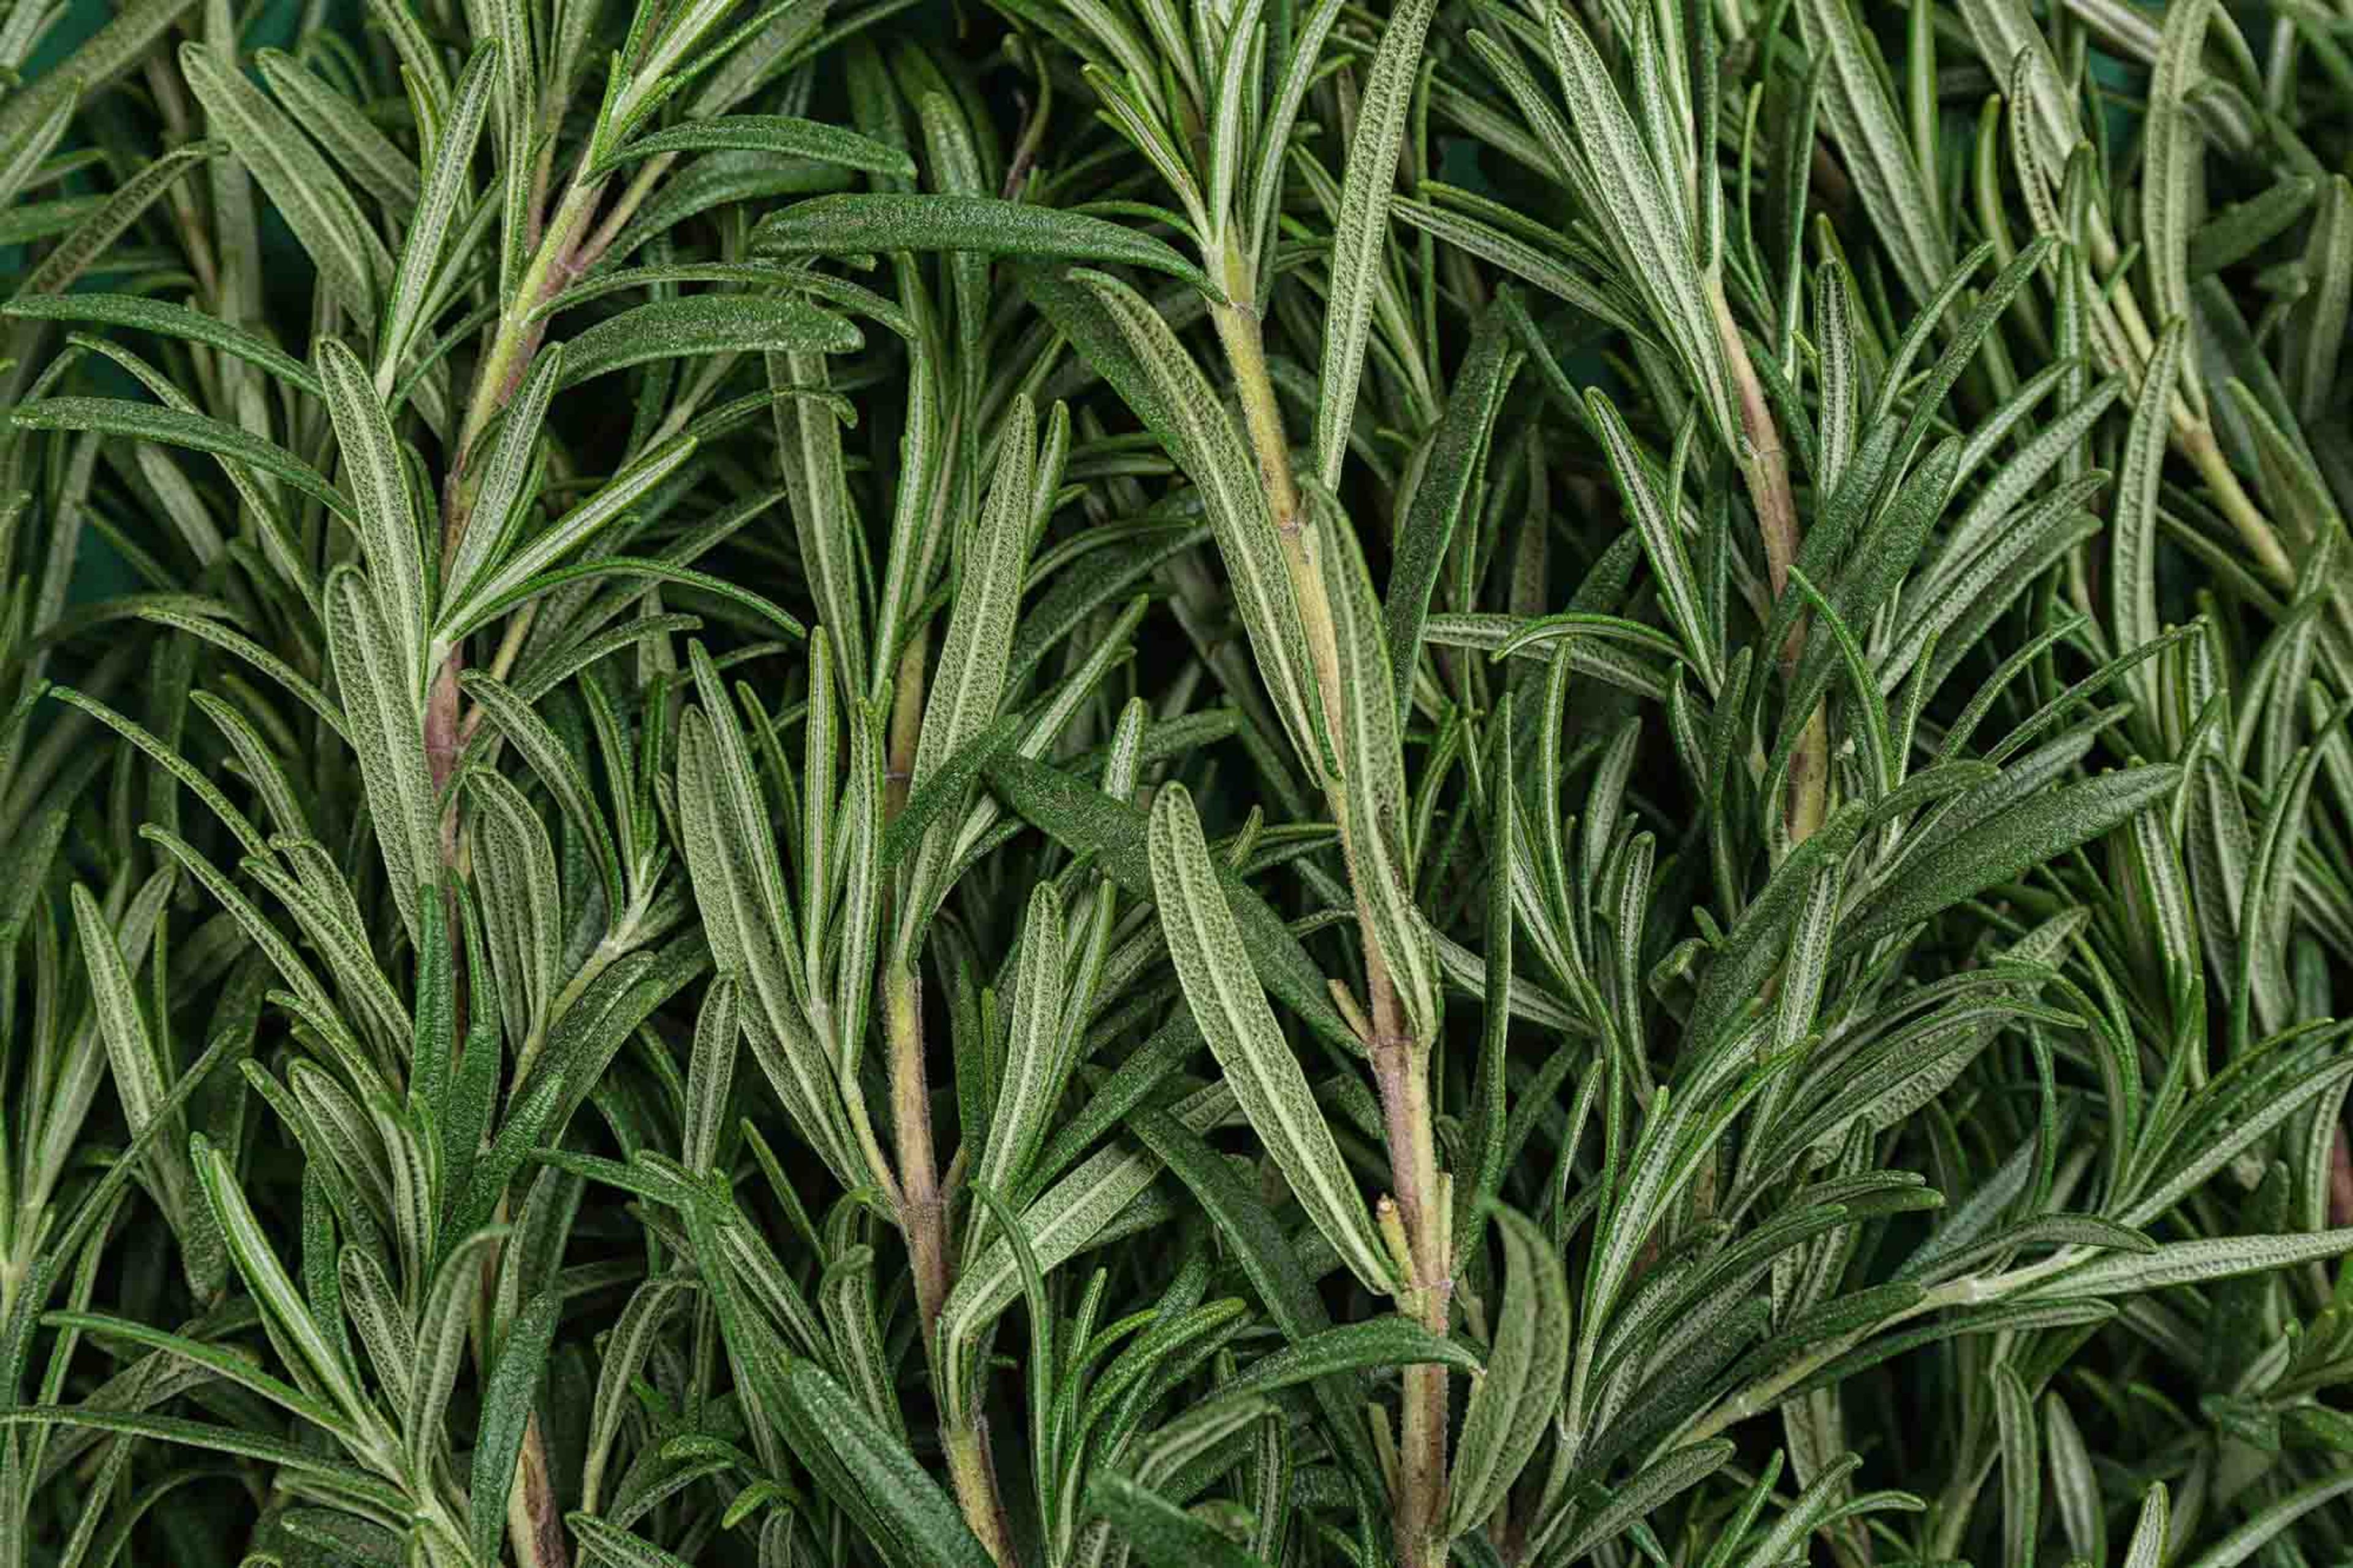 Rosemary plant containing rosemary oil which may help with hair growth and hair loss prevention.